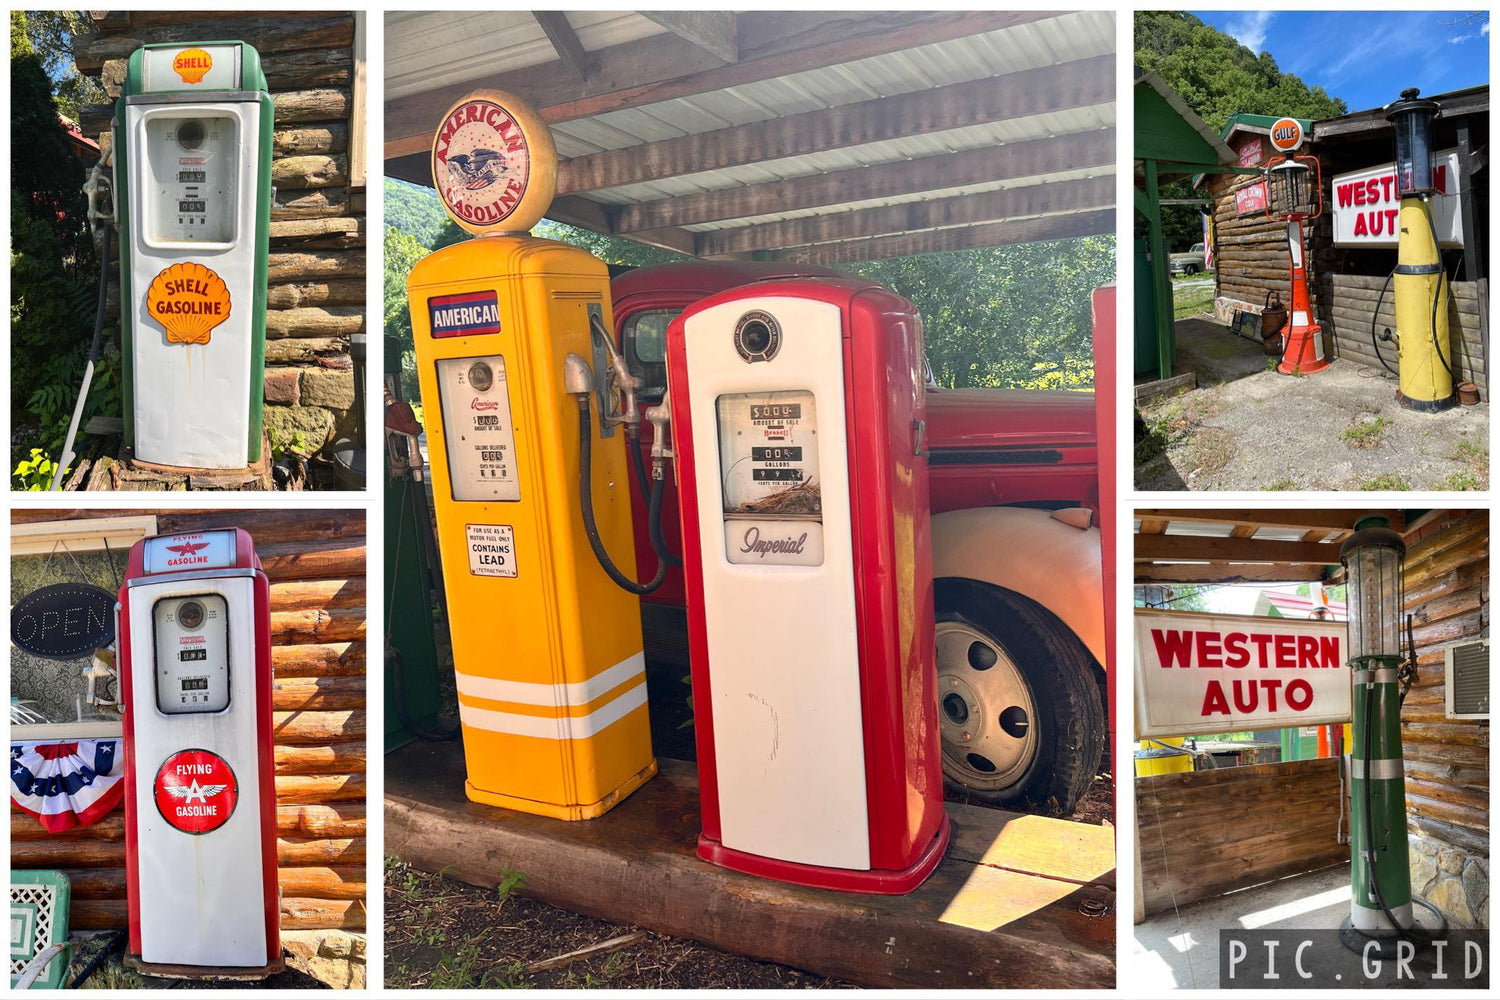 American Picker stopped by to see our vintage gas pumps and memorabilia showcased at our log cabin lodging office at Seneca Rocks.